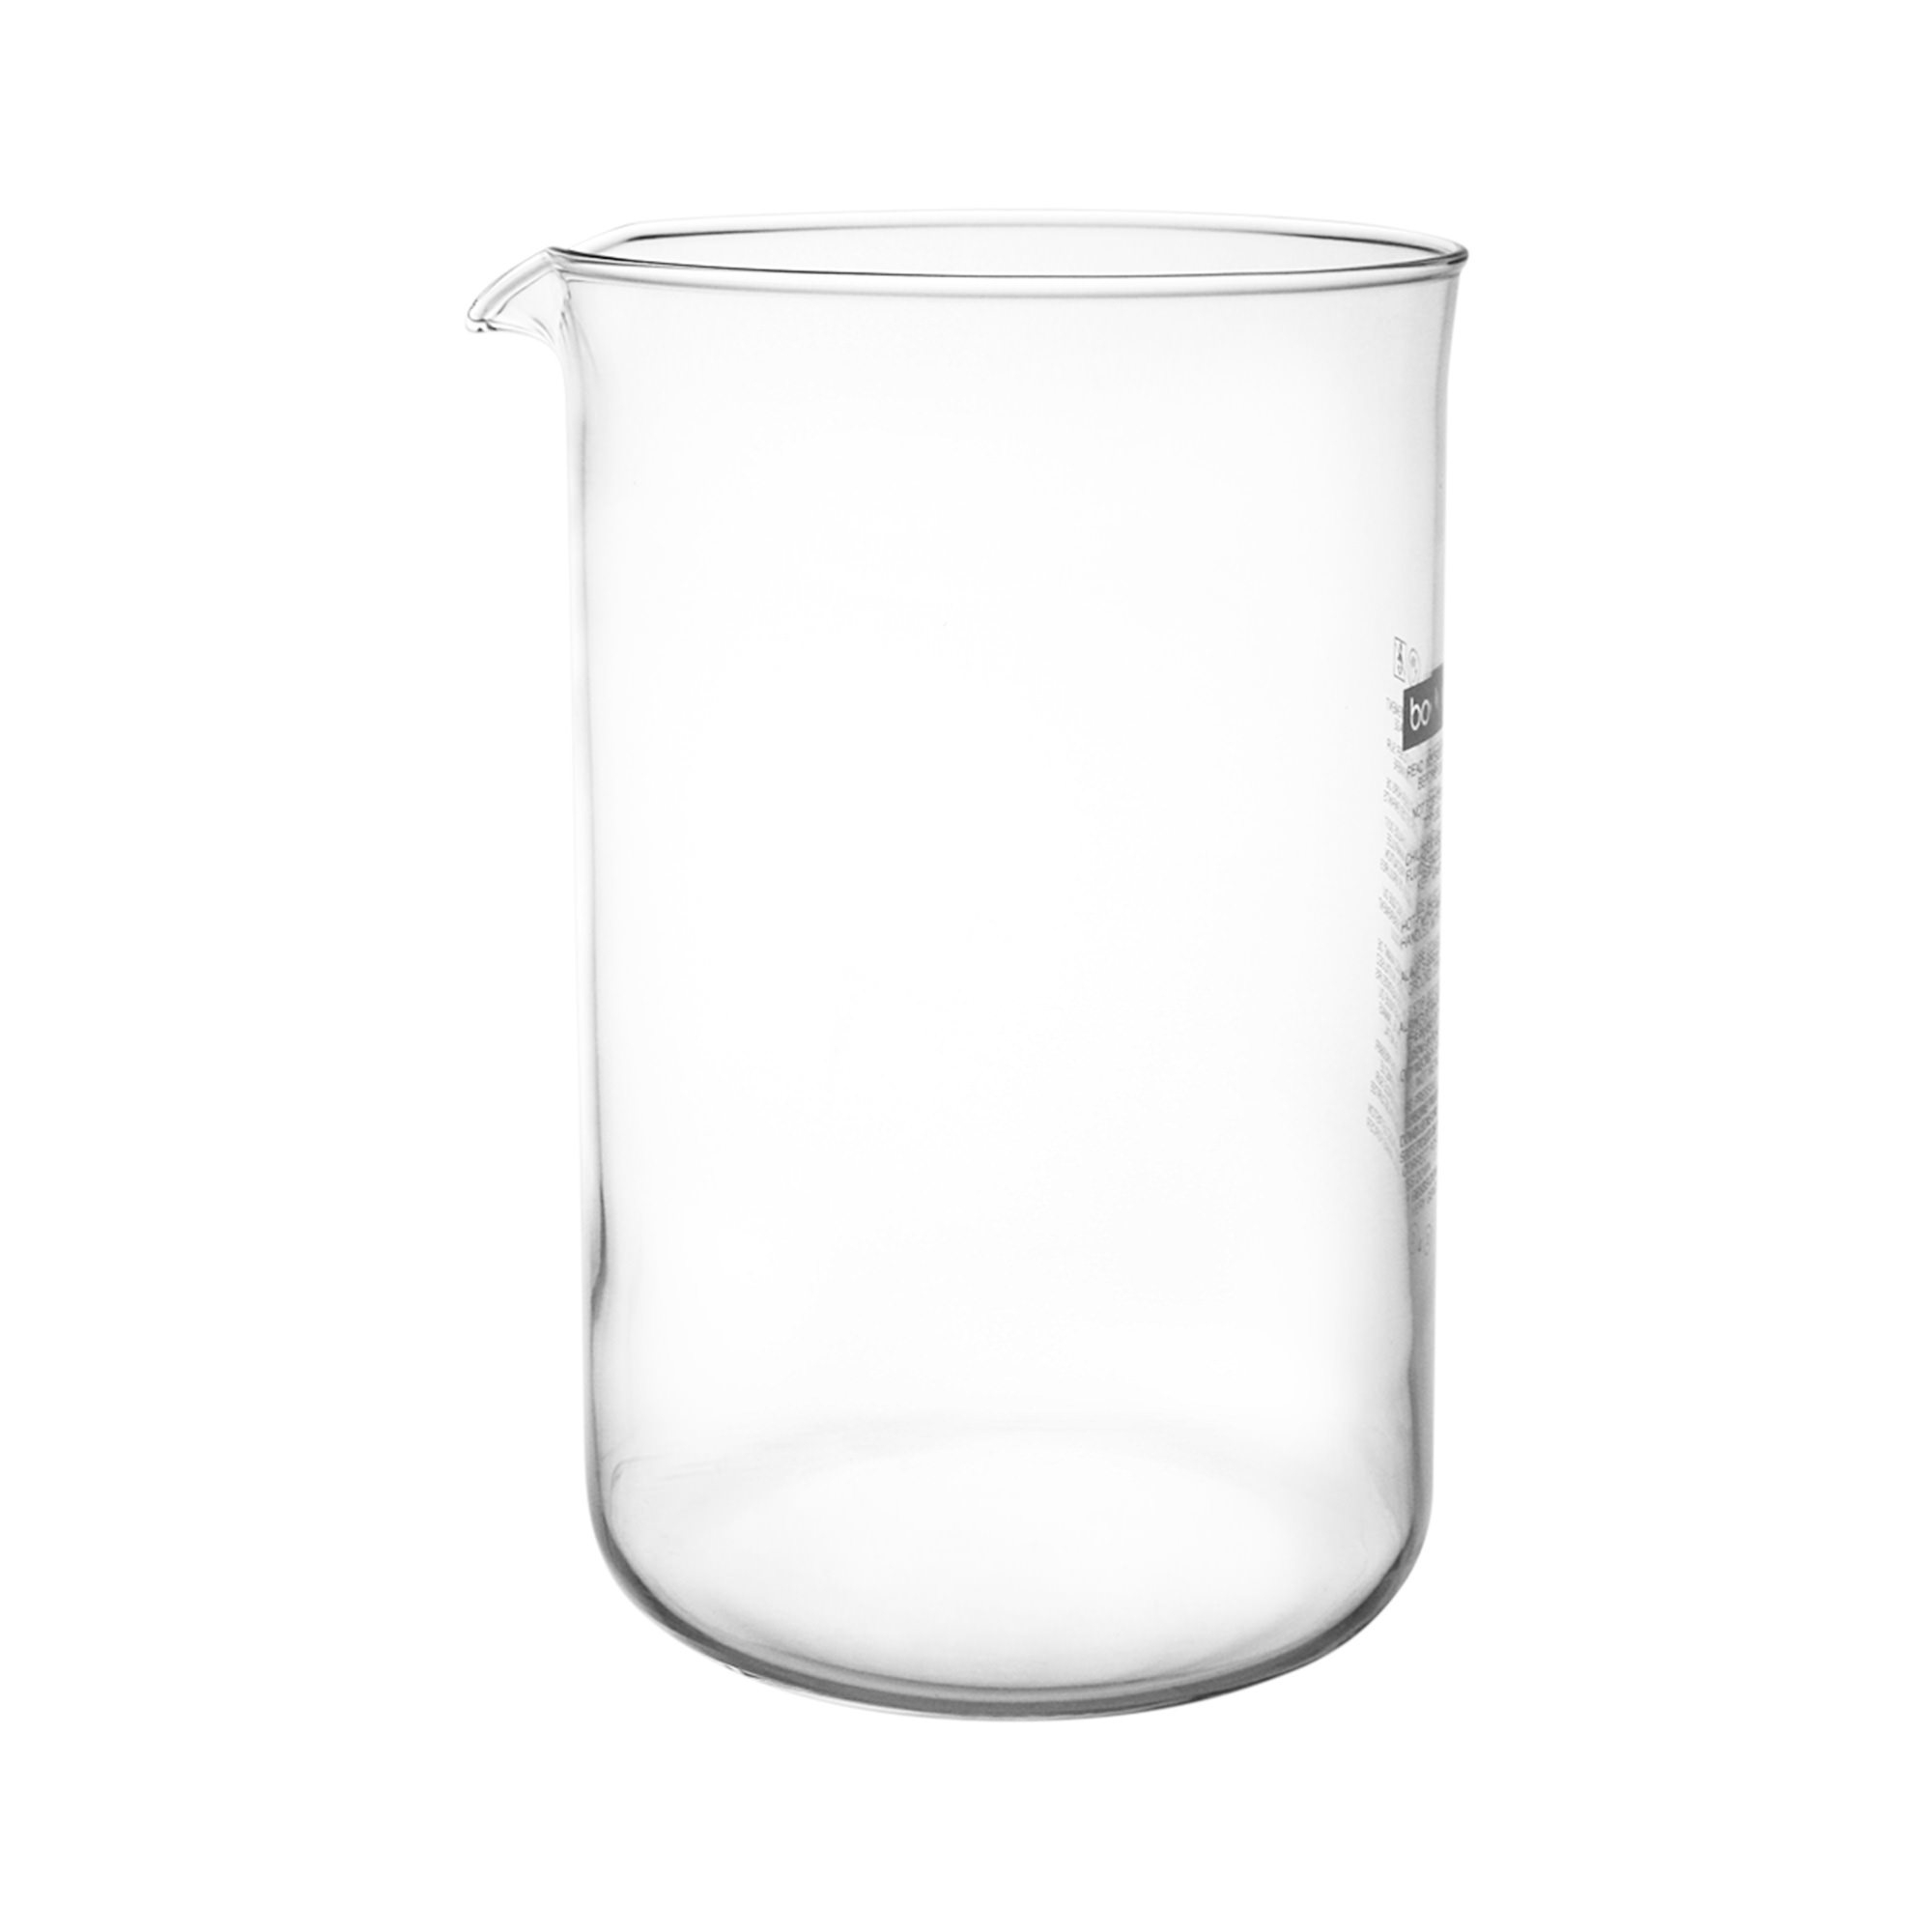 Bodum Replacement Glass 12 Cup Image 1